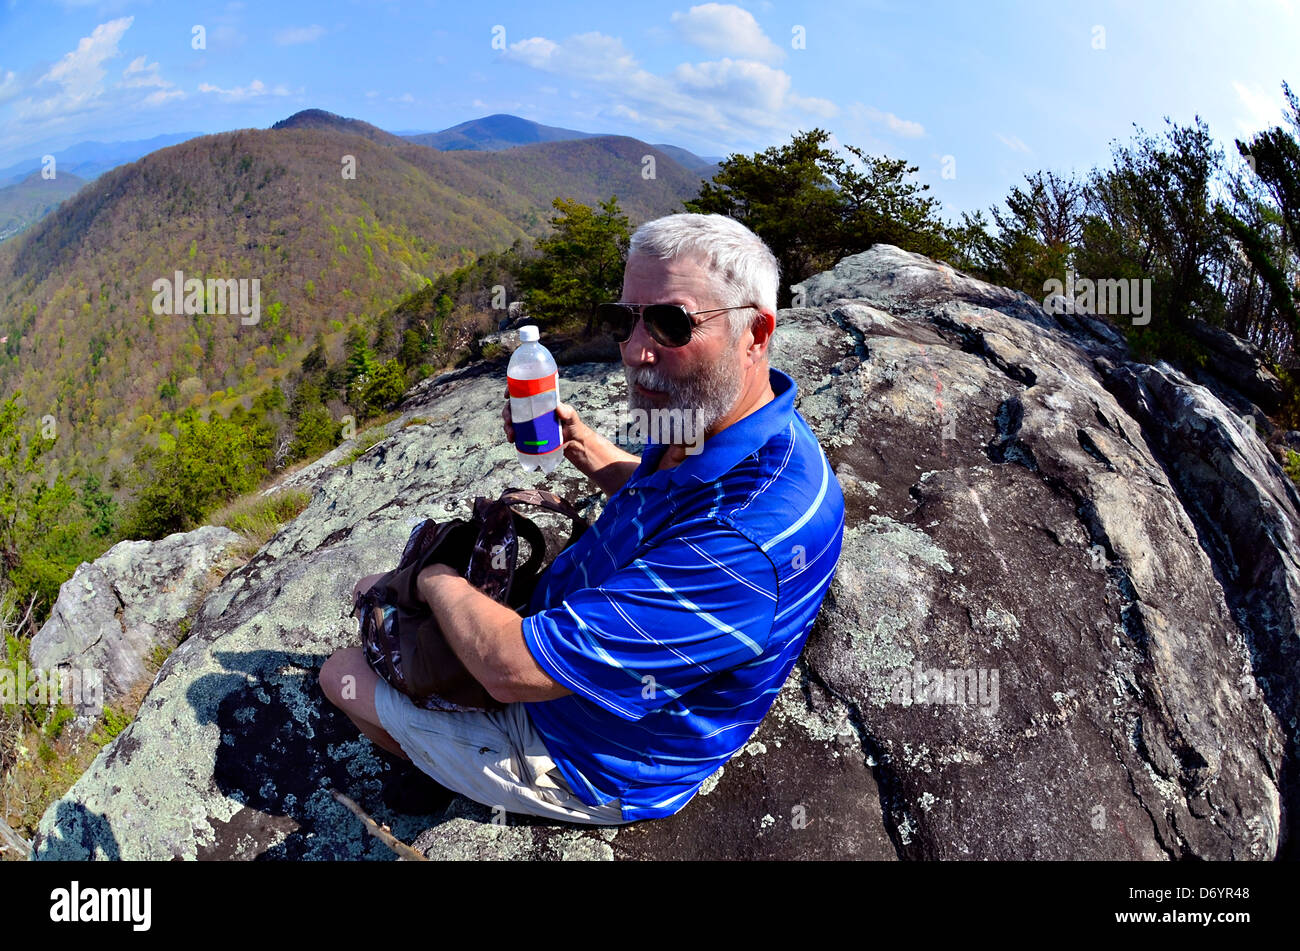 Older man on a rock overlook stopping to eat and drink in the Smoky Mountains. Taken with fisheye lens. Stock Photo